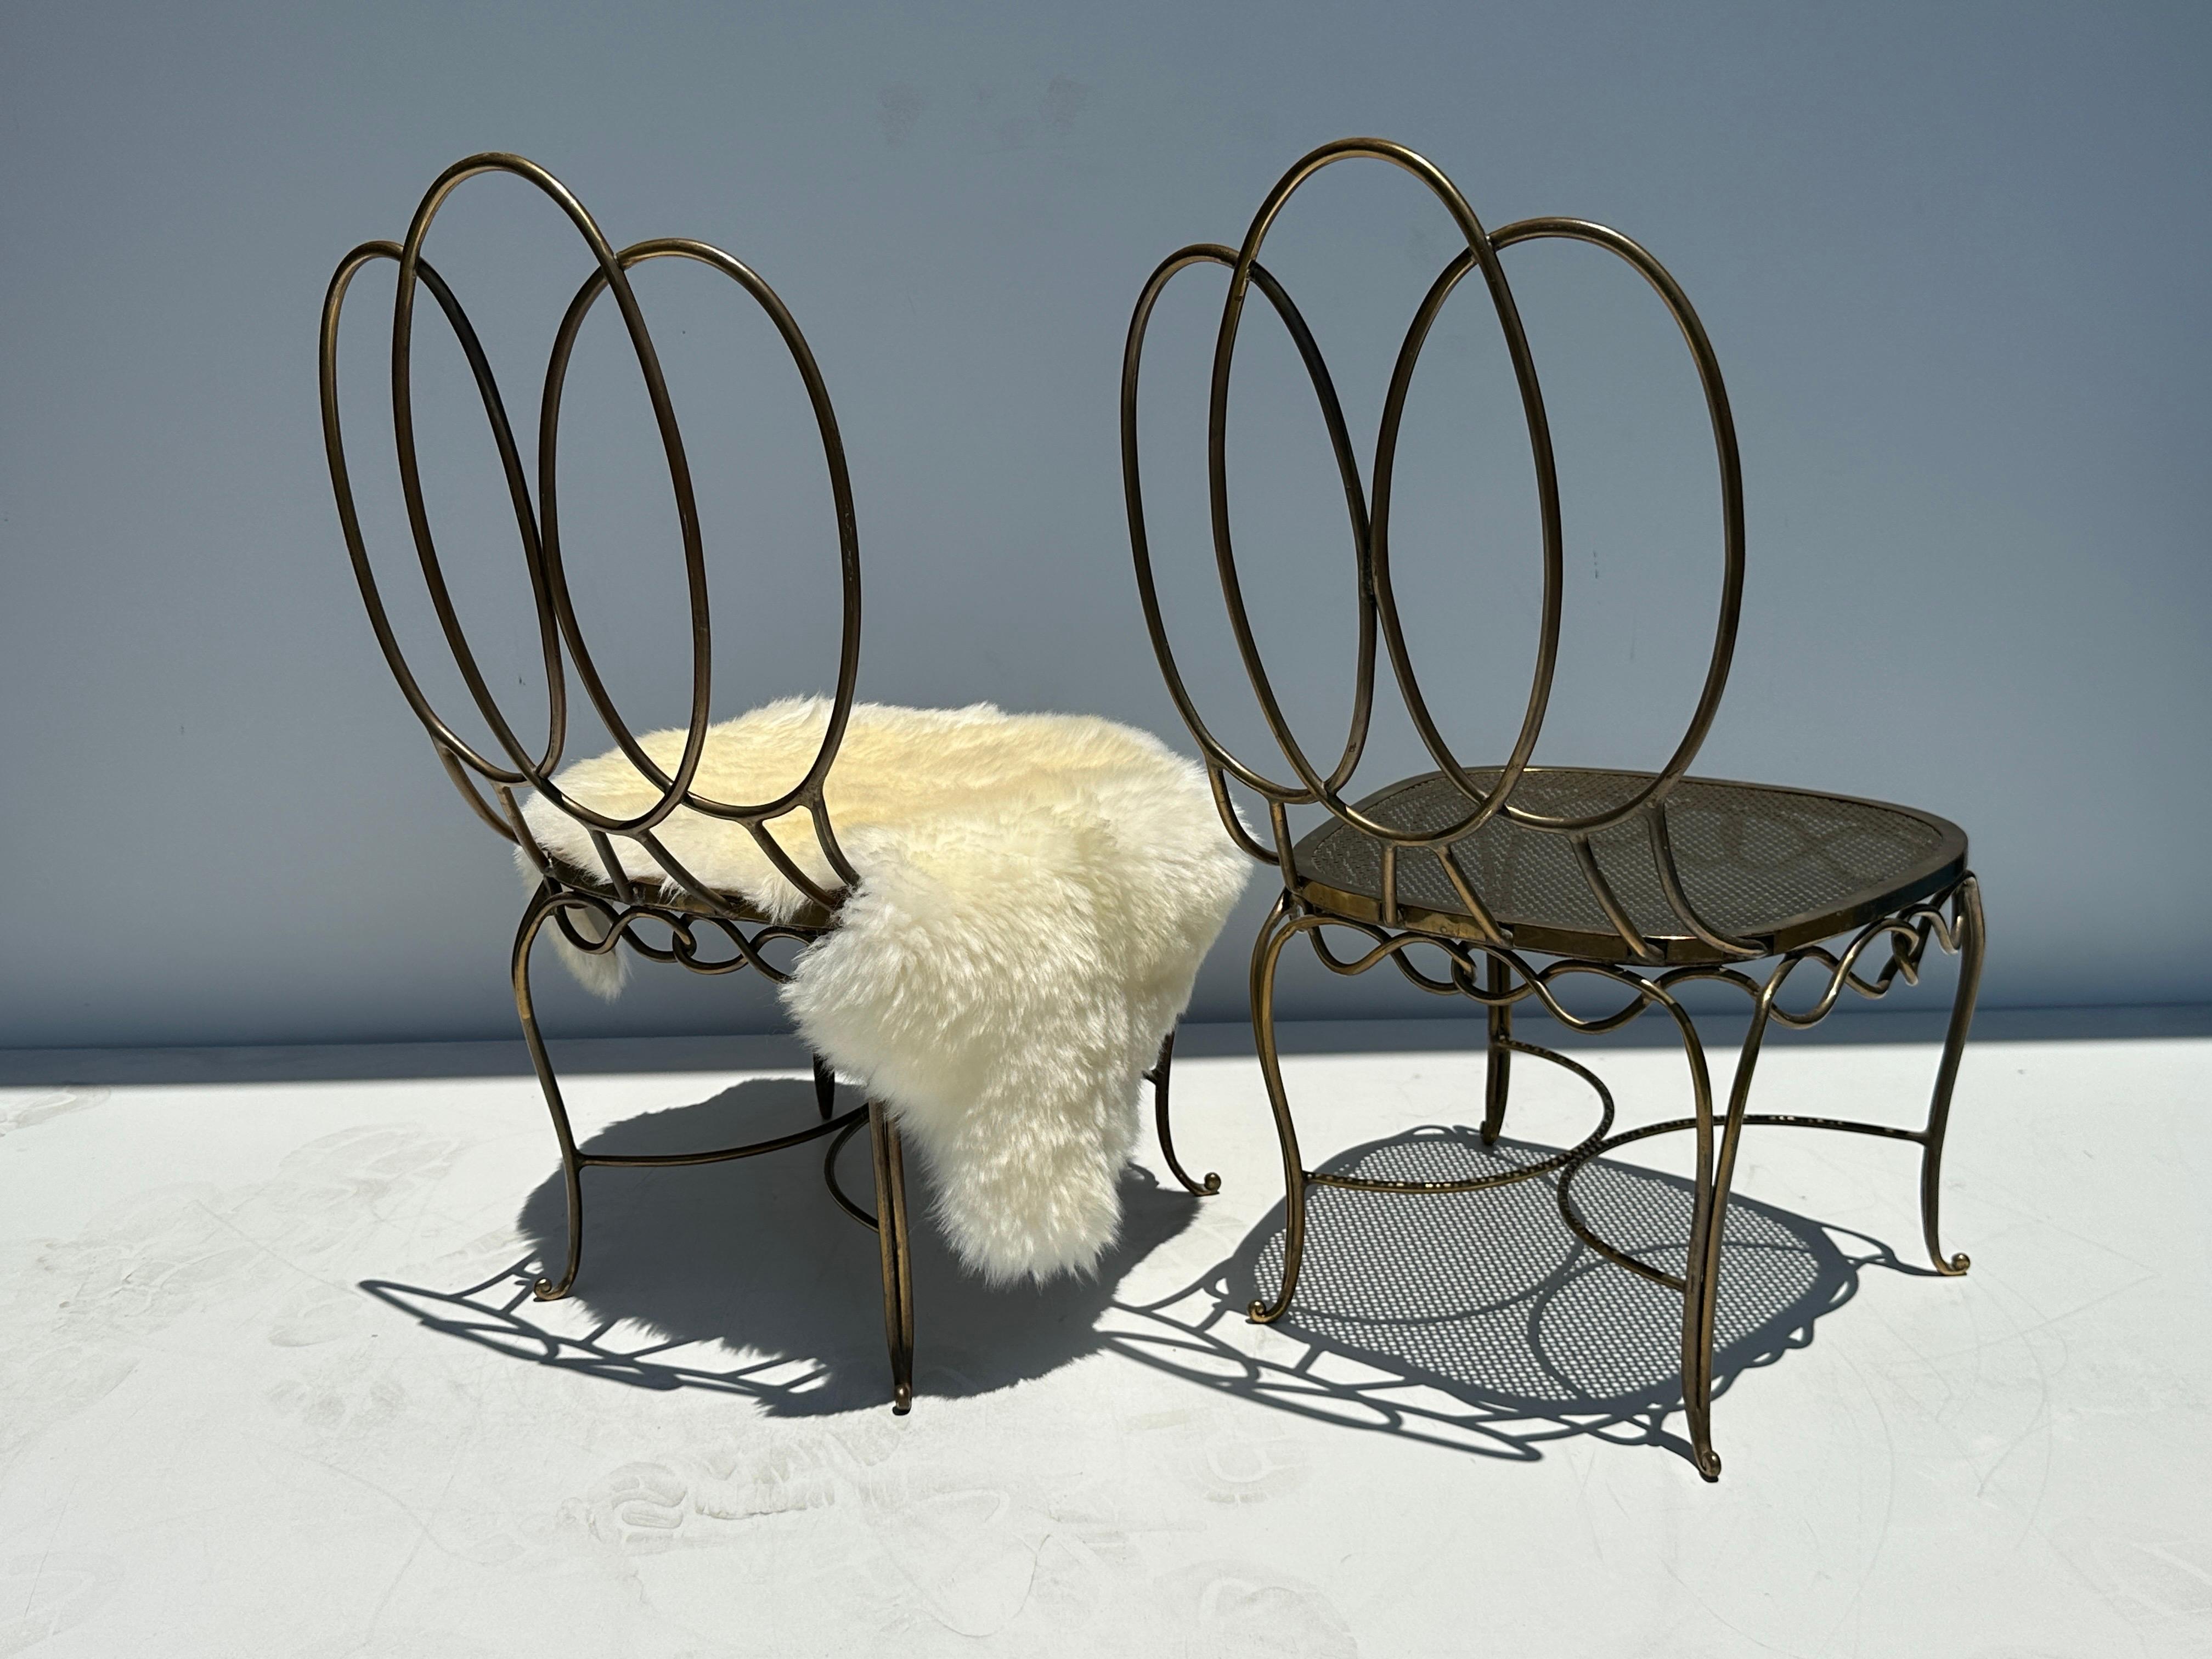 Pair of patinated bronze / brass low parlour chairs in the style of Jean Royere. Sheep fur shown is decorative and not included.